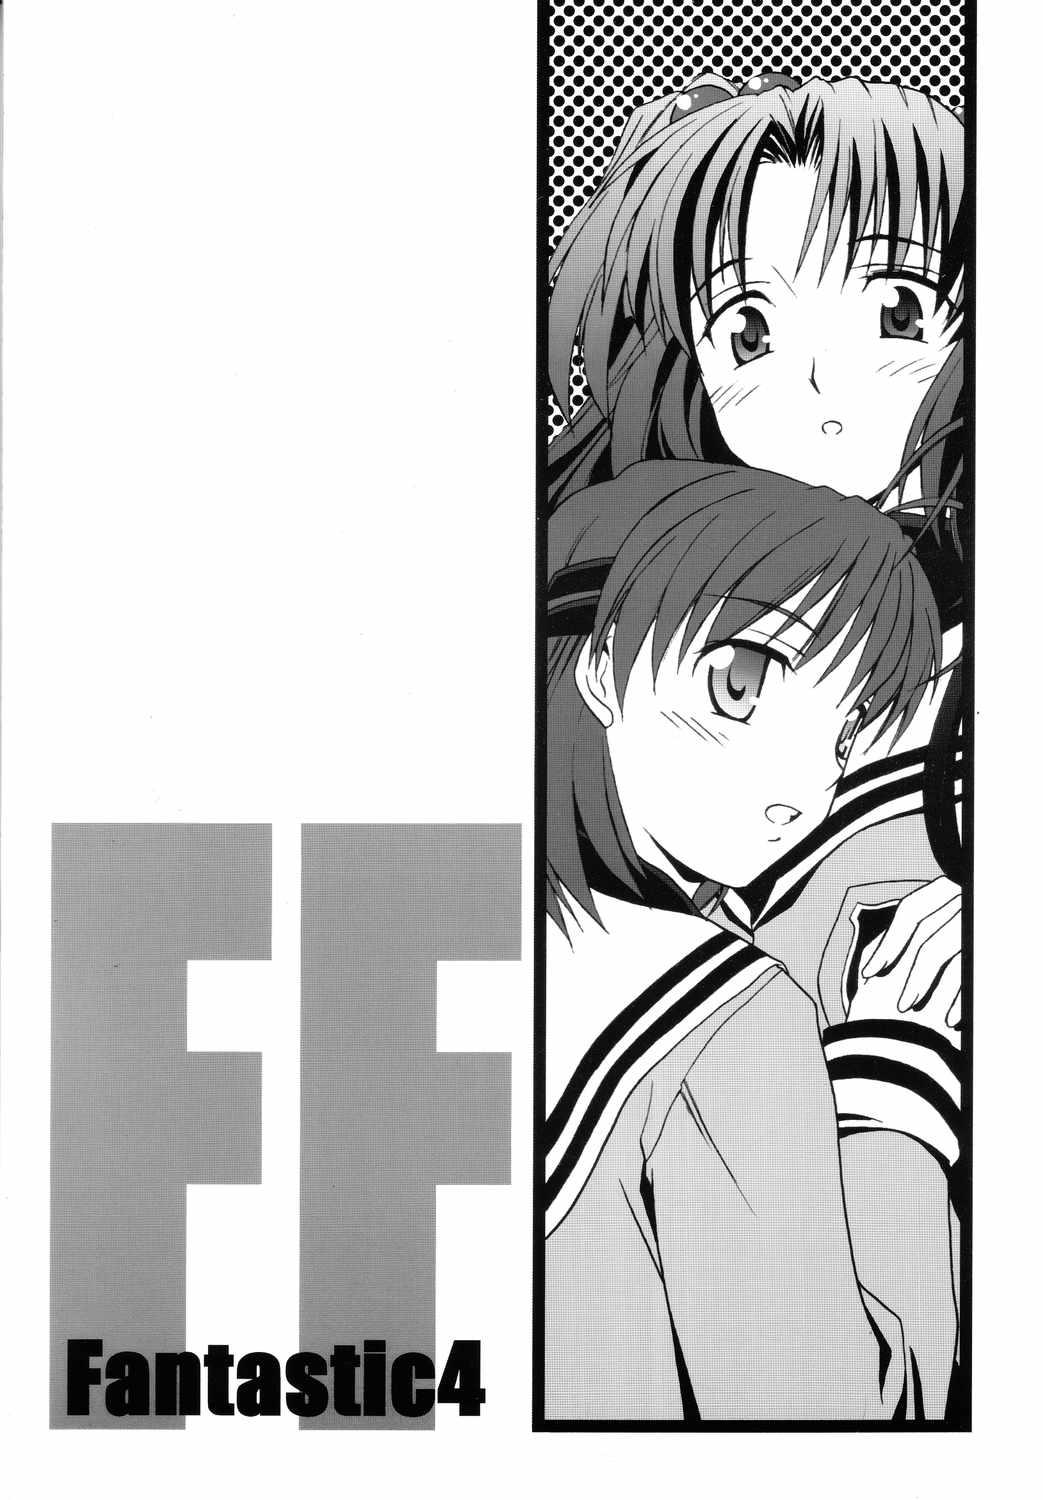 Phat Ass Fantastic 4 - Clannad Petite Girl Porn - Page 1